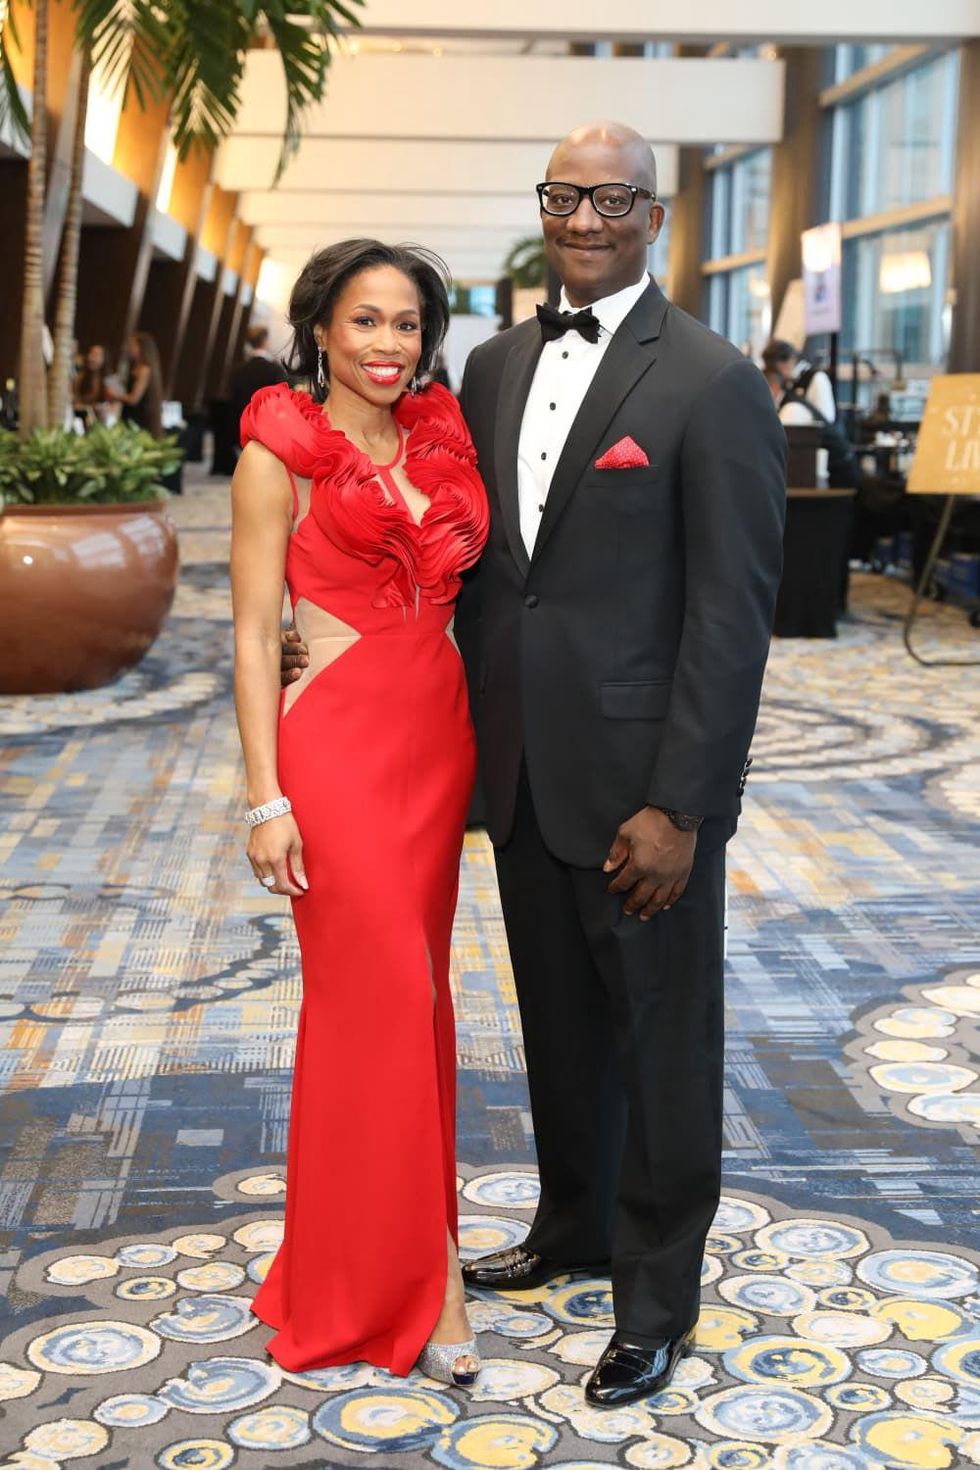 Heart Ball 2020 Roslyn Bazzell Mitchell and Derrick Mitchell